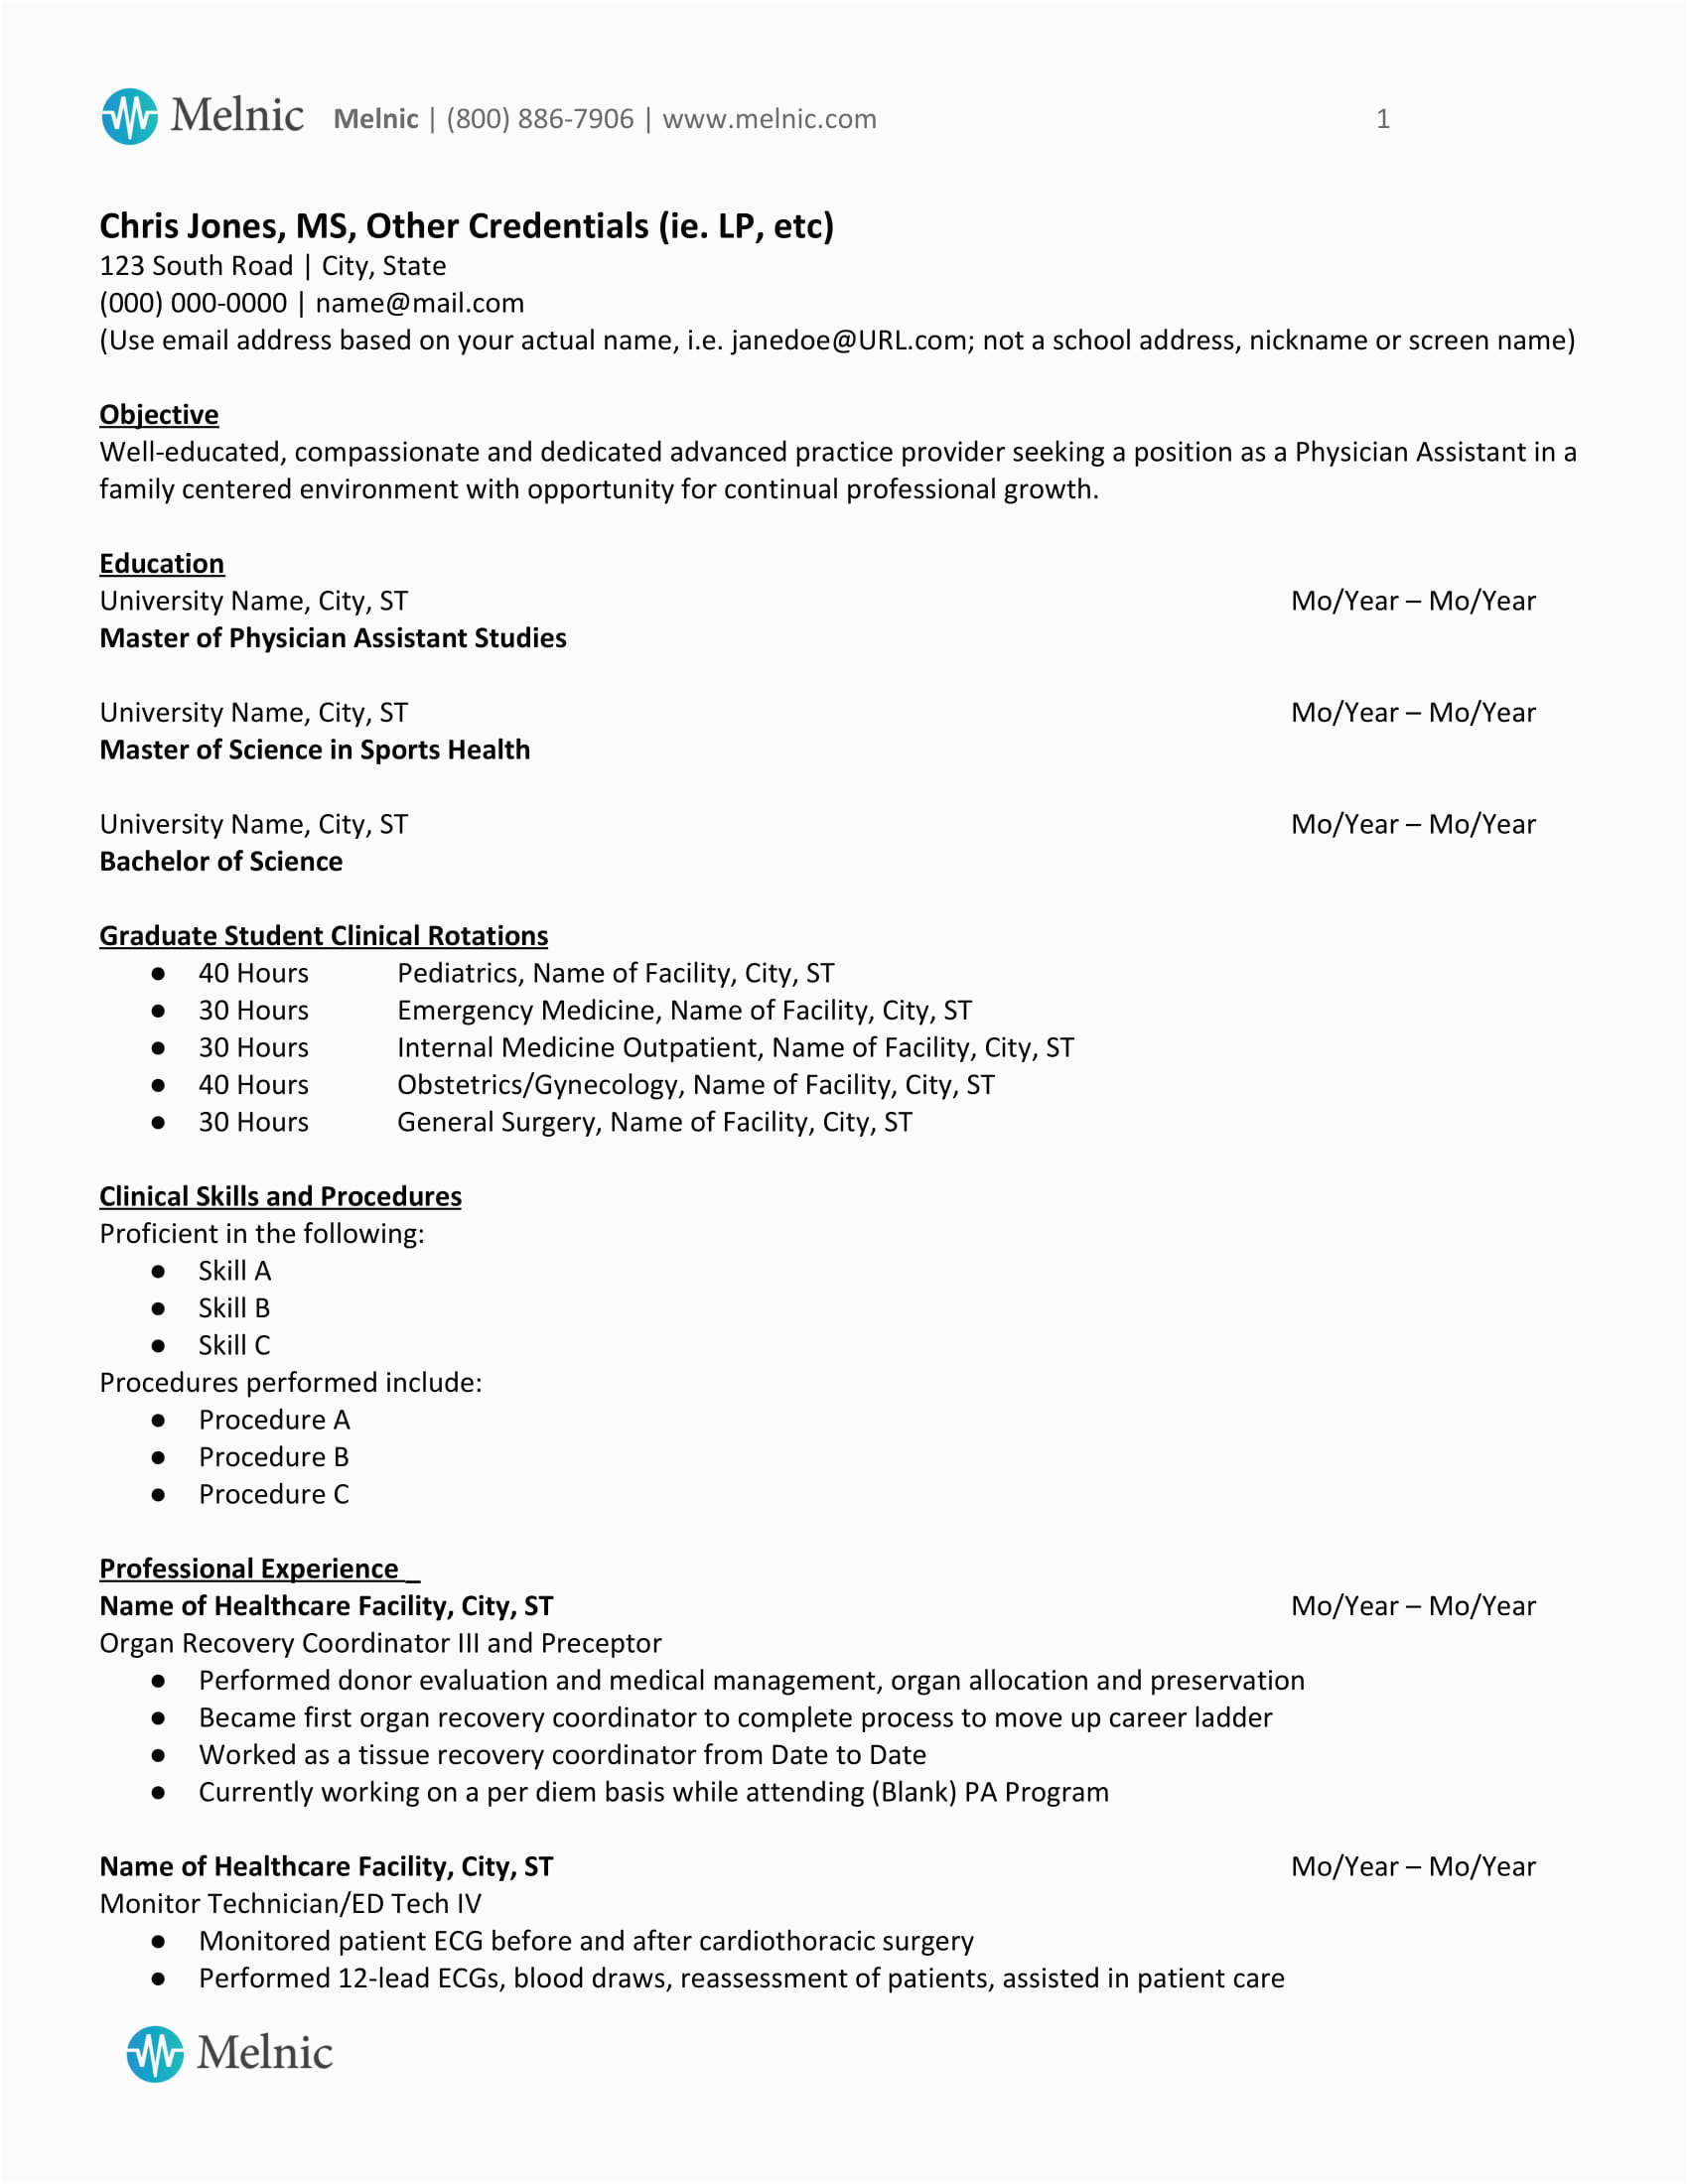 Sample Resume for New Job Seekers Physician assistant Sample Resume for Job Seekers Melnic